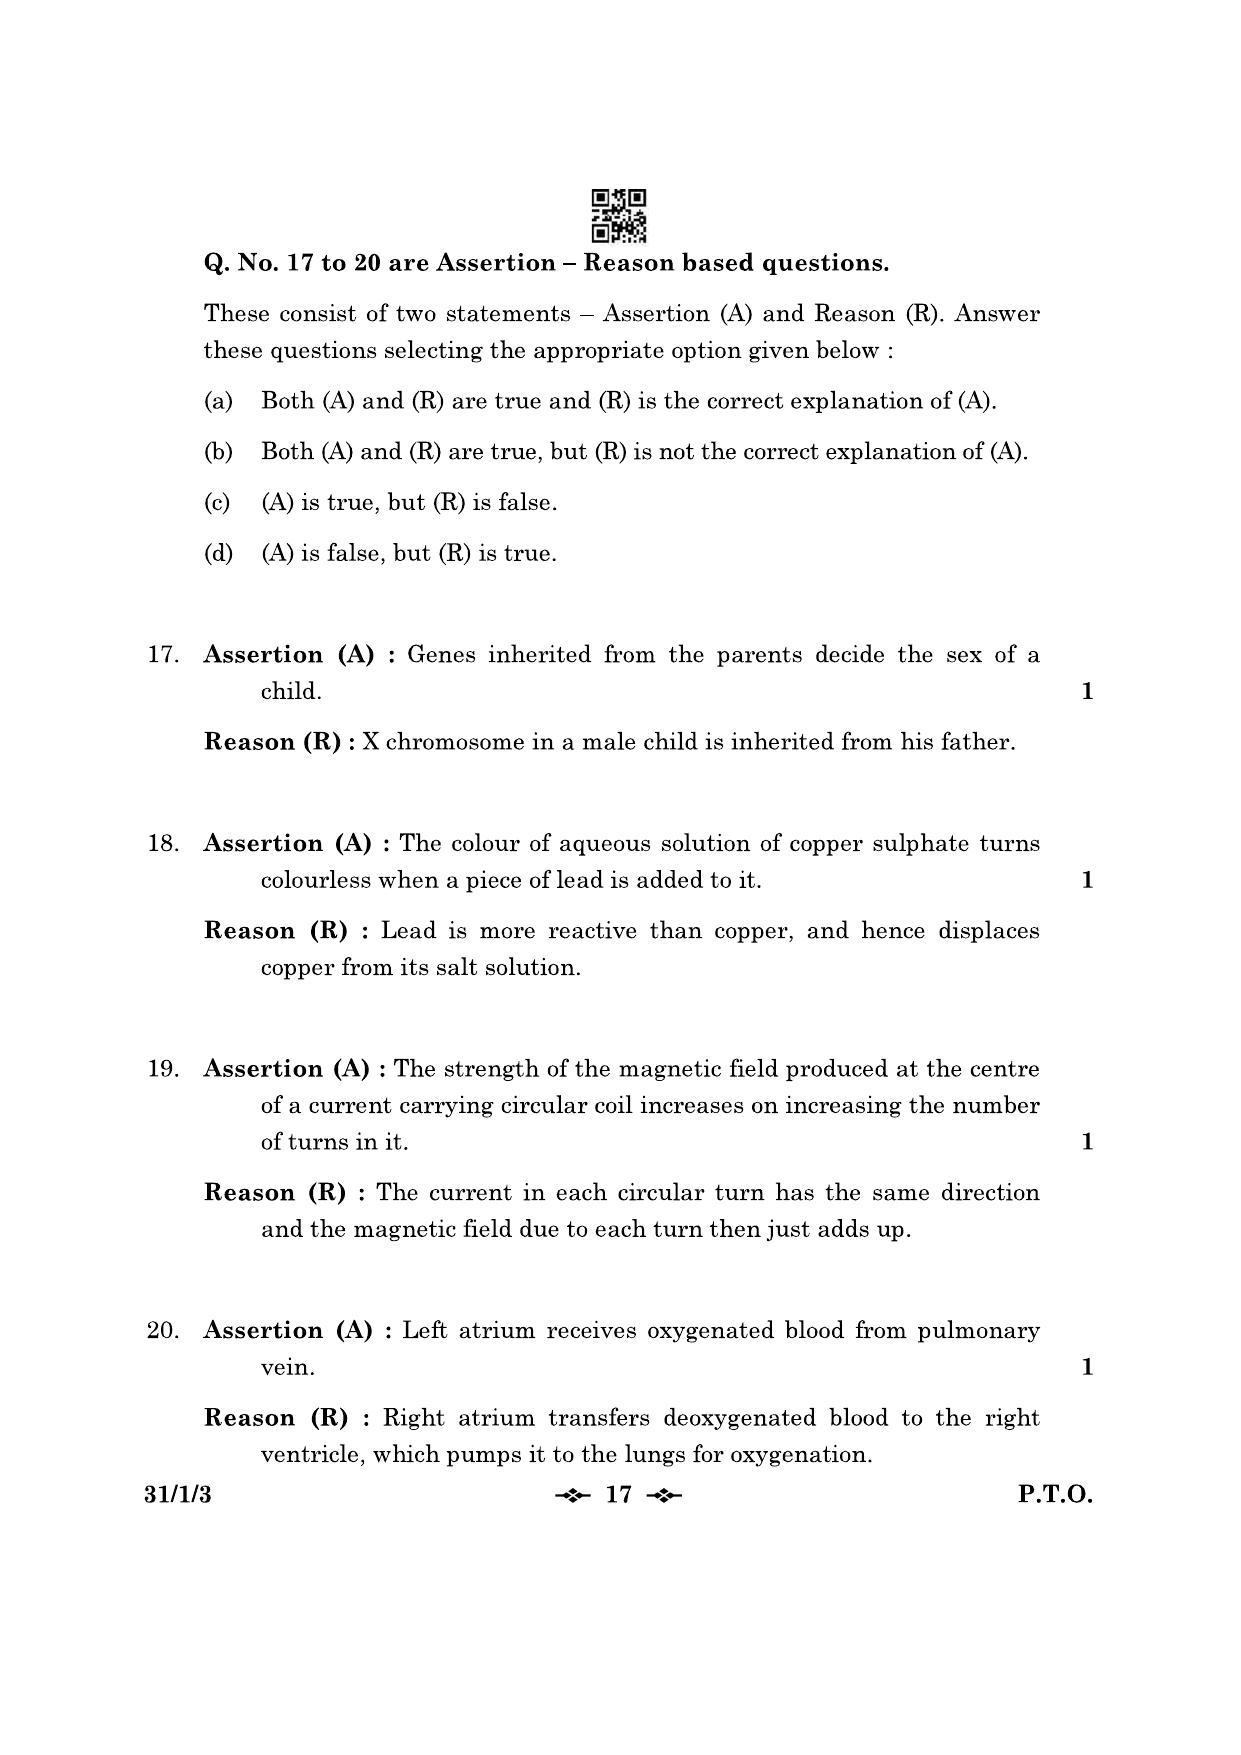 CBSE Class 10 31-1-3 Science 2023 Question Paper - Page 17